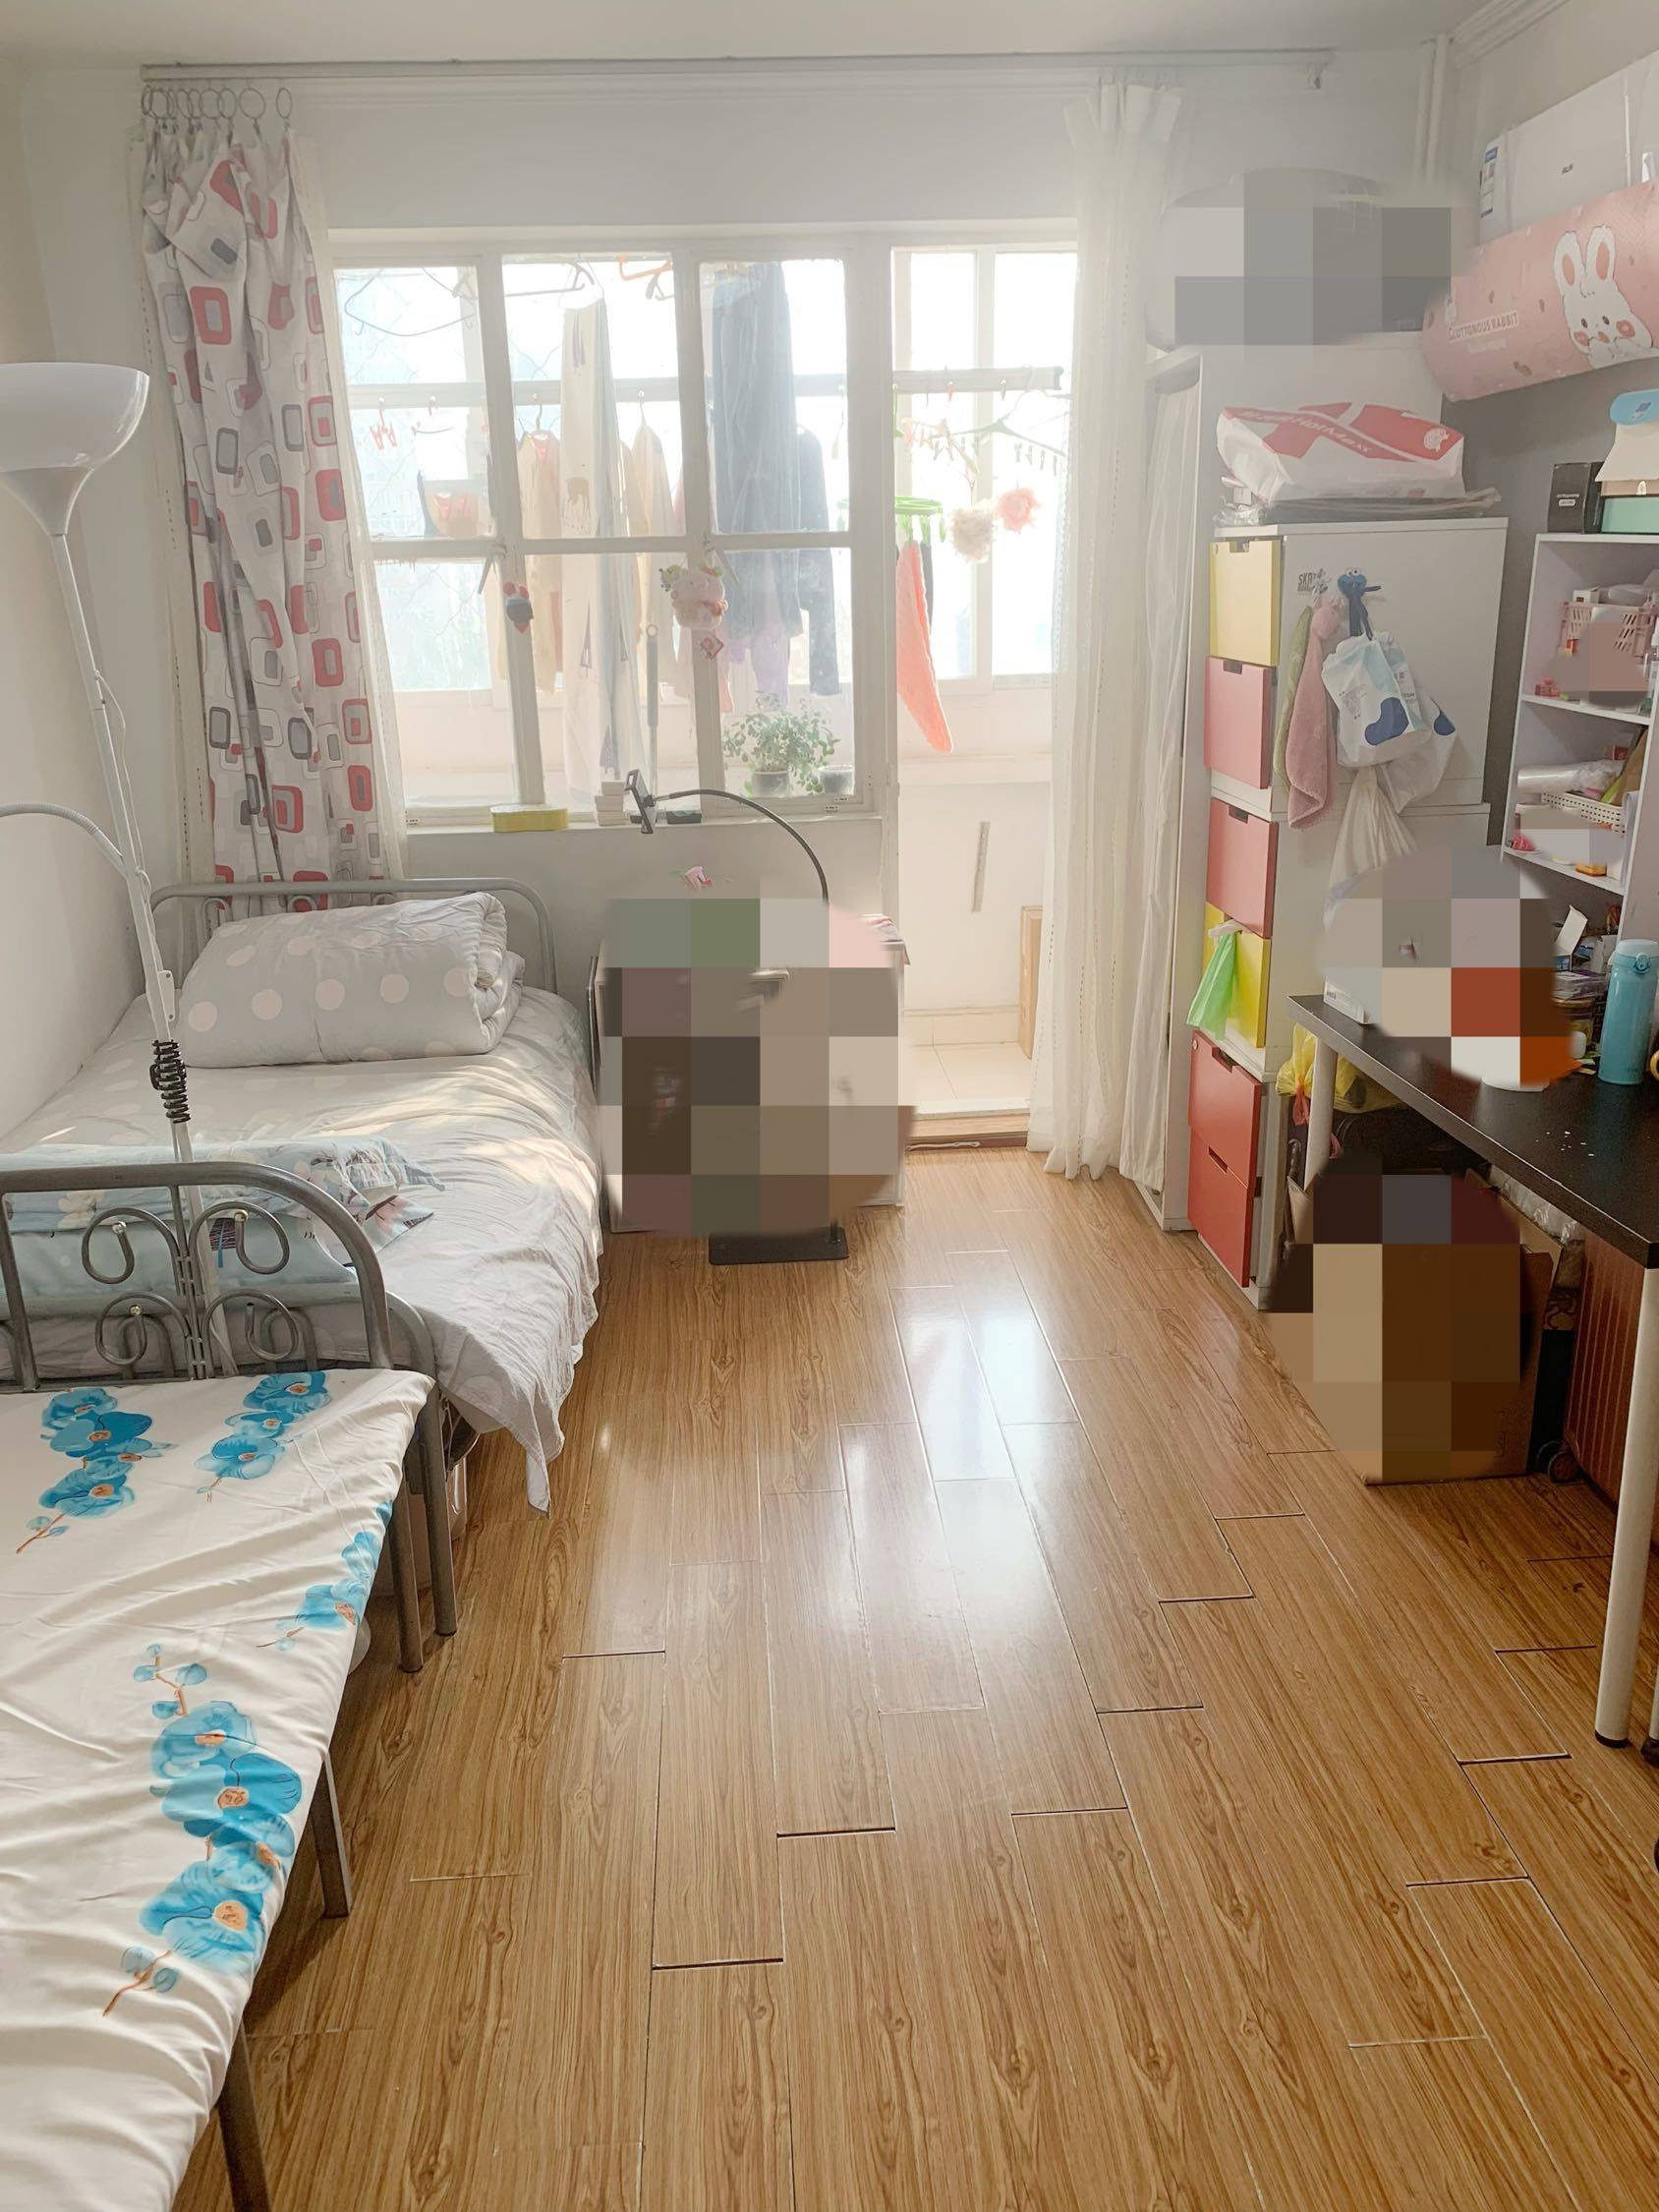 Beijing-Chaoyang-Cozy Home,“Friends”,Chilled,LGBTQ Friendly,Pet Friendly